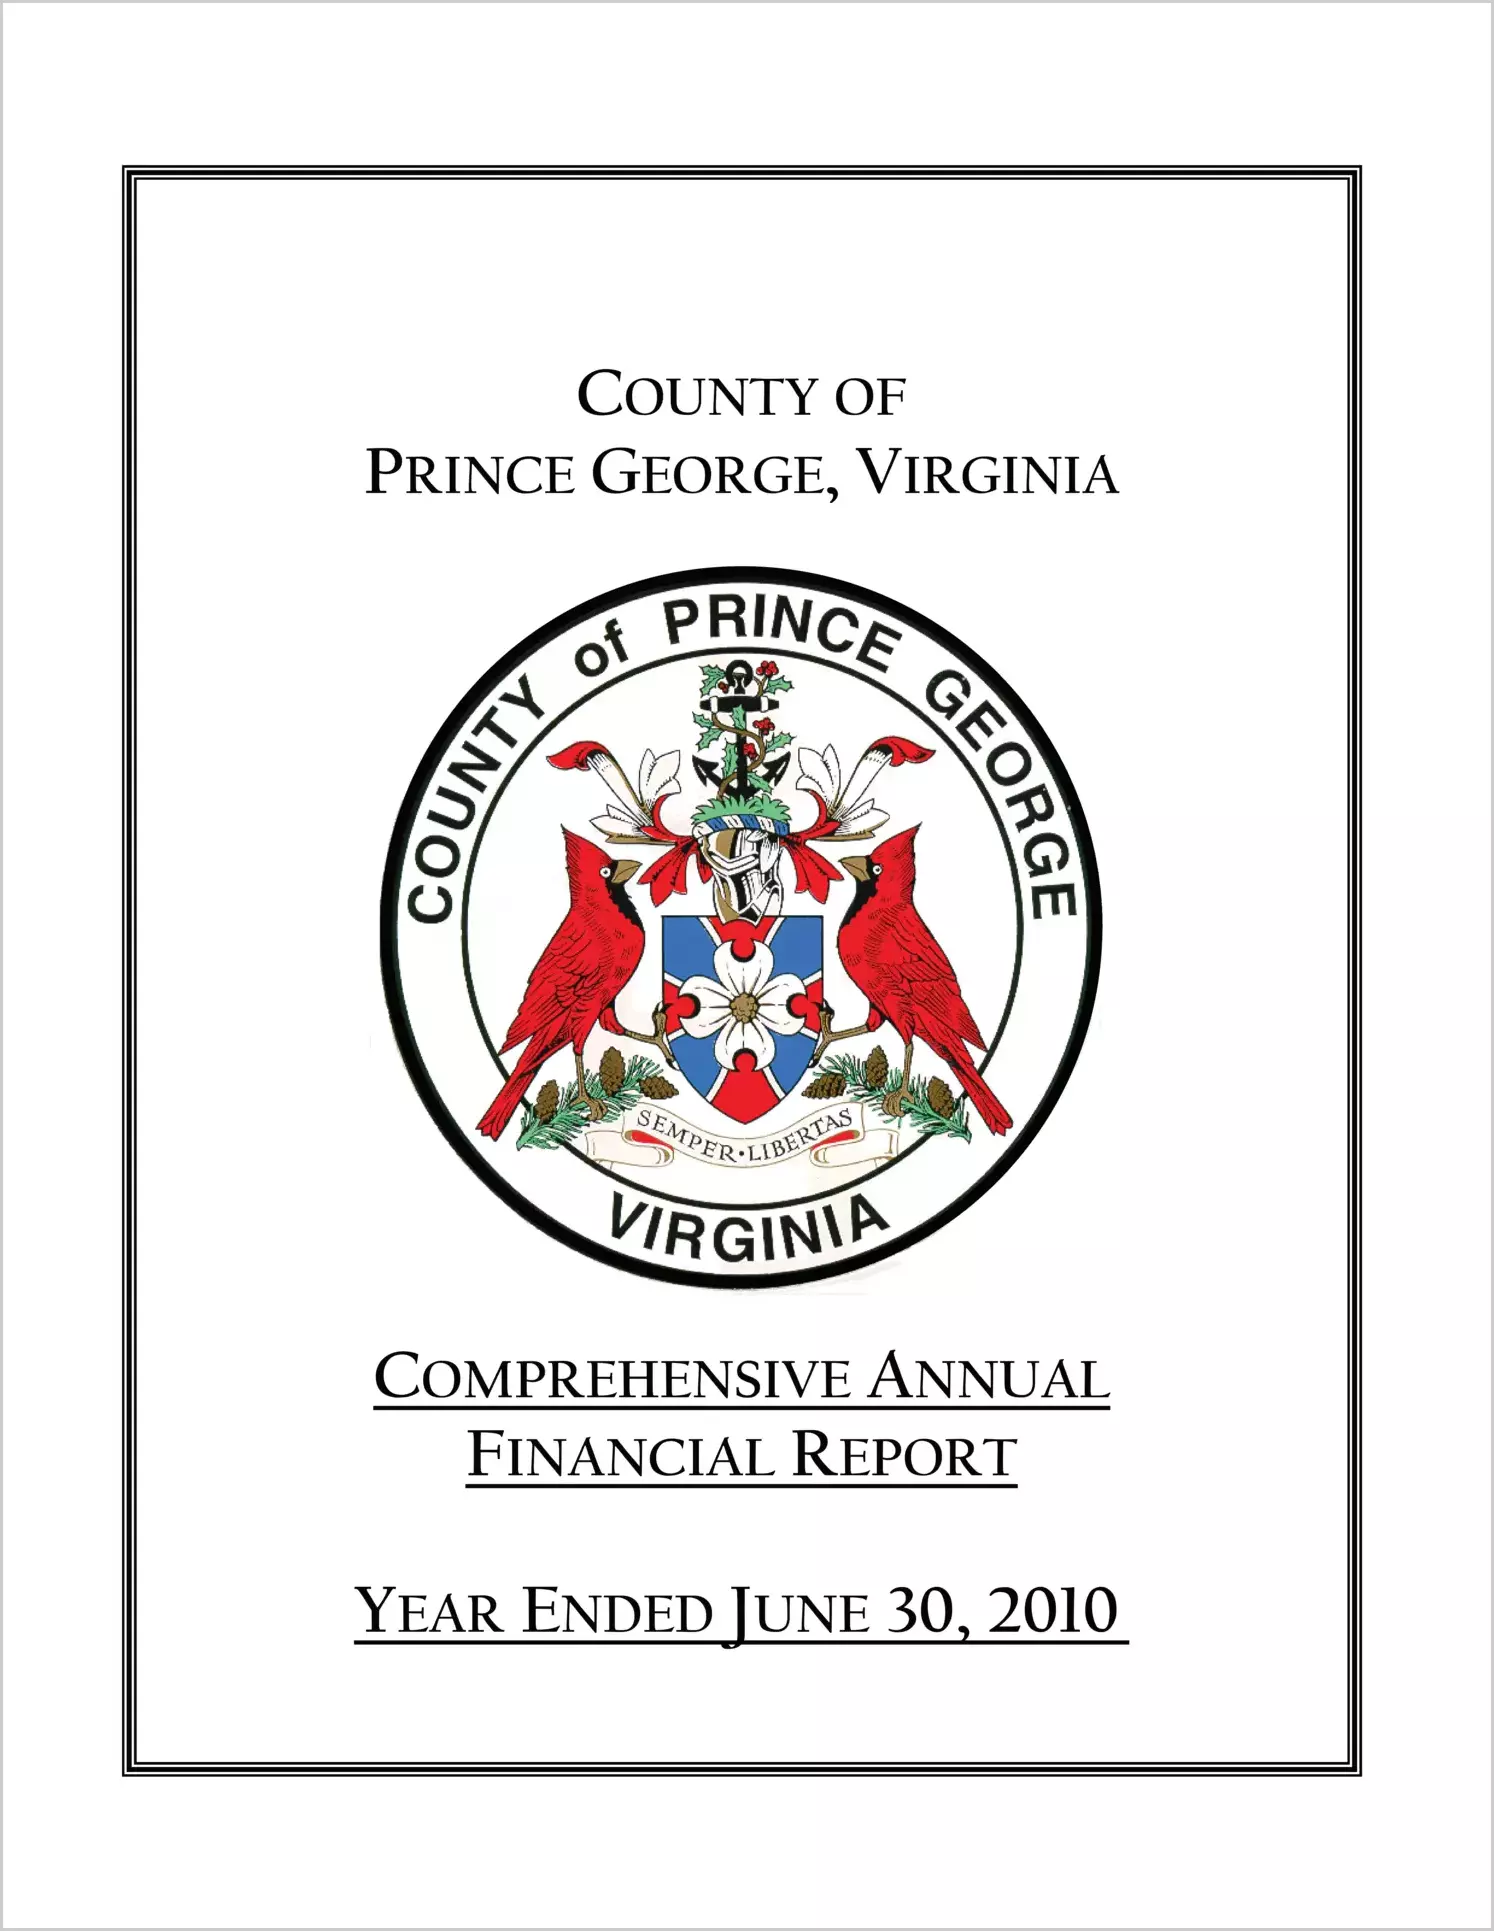 2010 Annual Financial Report for County of Prince George